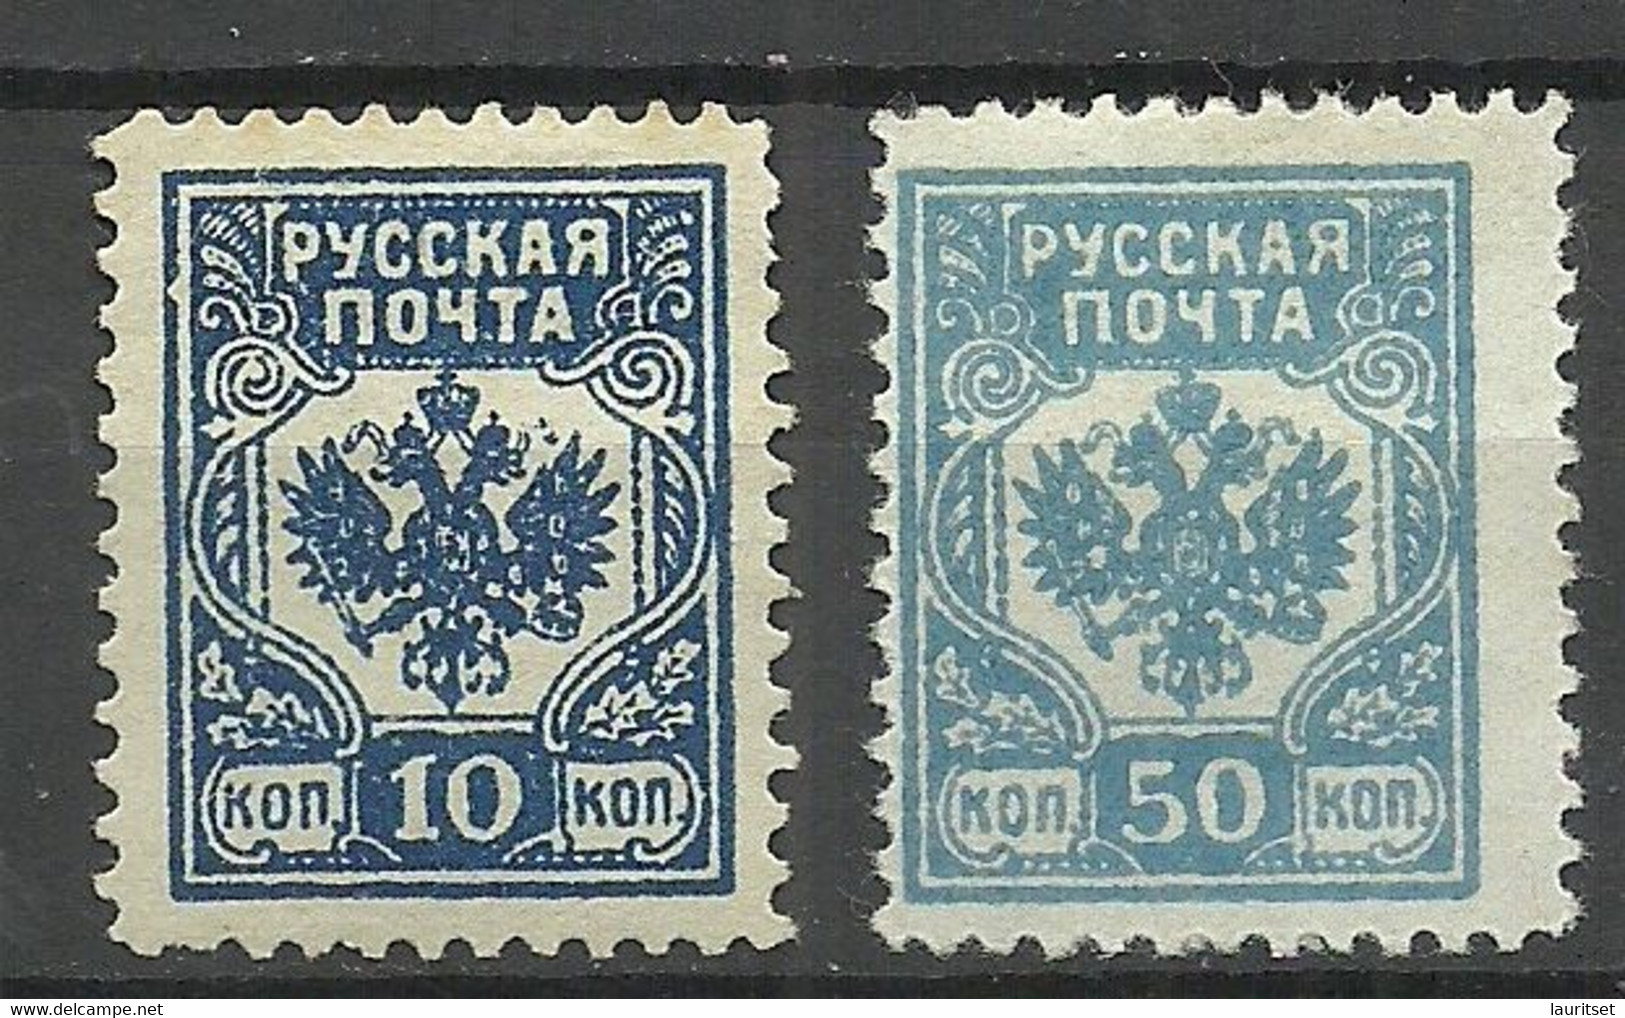 Russia Russland LETTLAND Latvia 1919 Westarmee Western Army General Bermondt-Avaloff, 2 Stamps, Perforated * - West Army